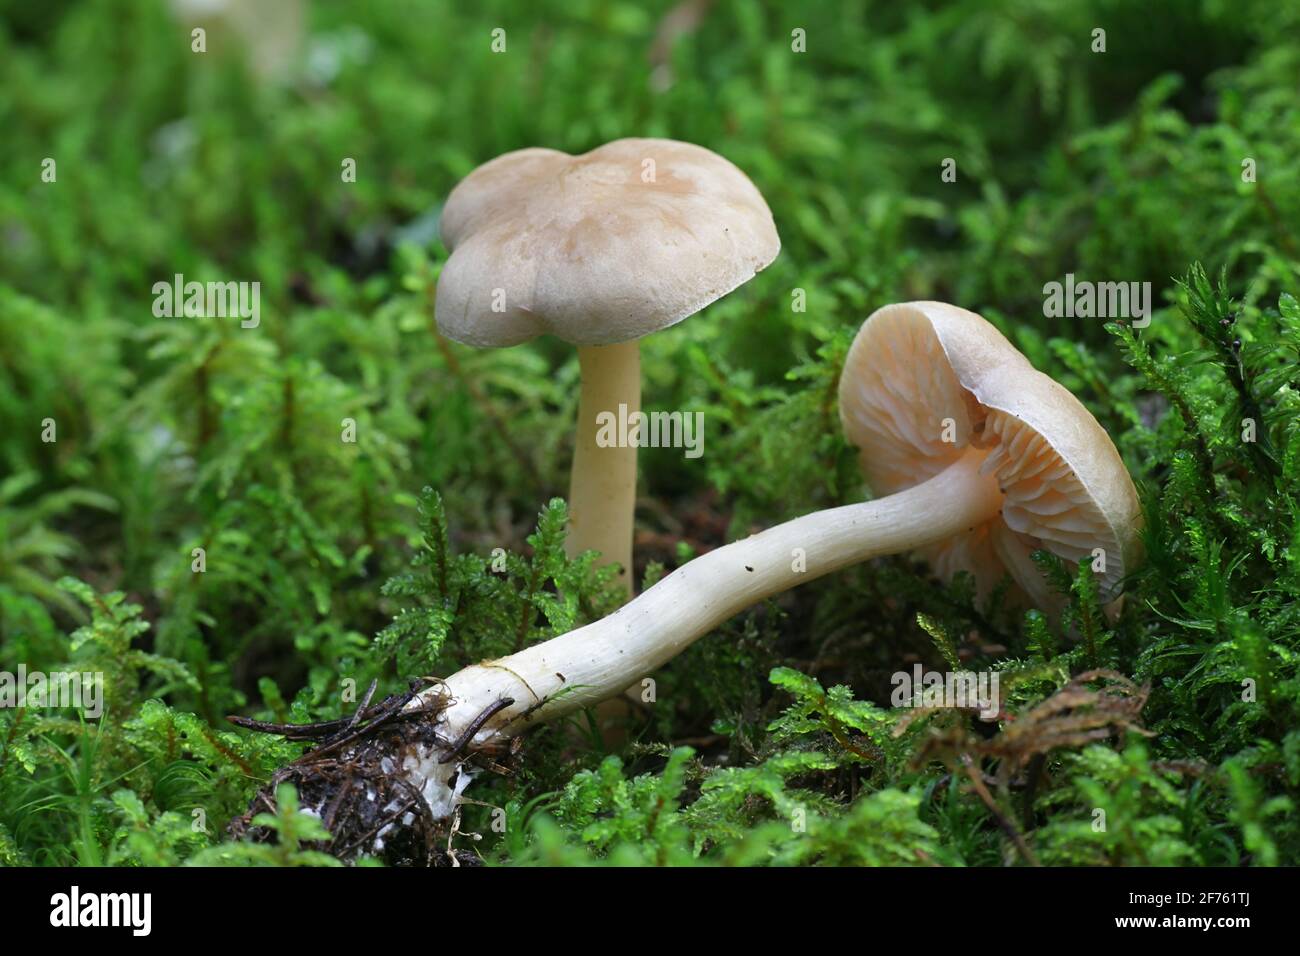 Tricholoma inamoenum, known as the gassy knight, wild mushroom from Finland Stock Photo